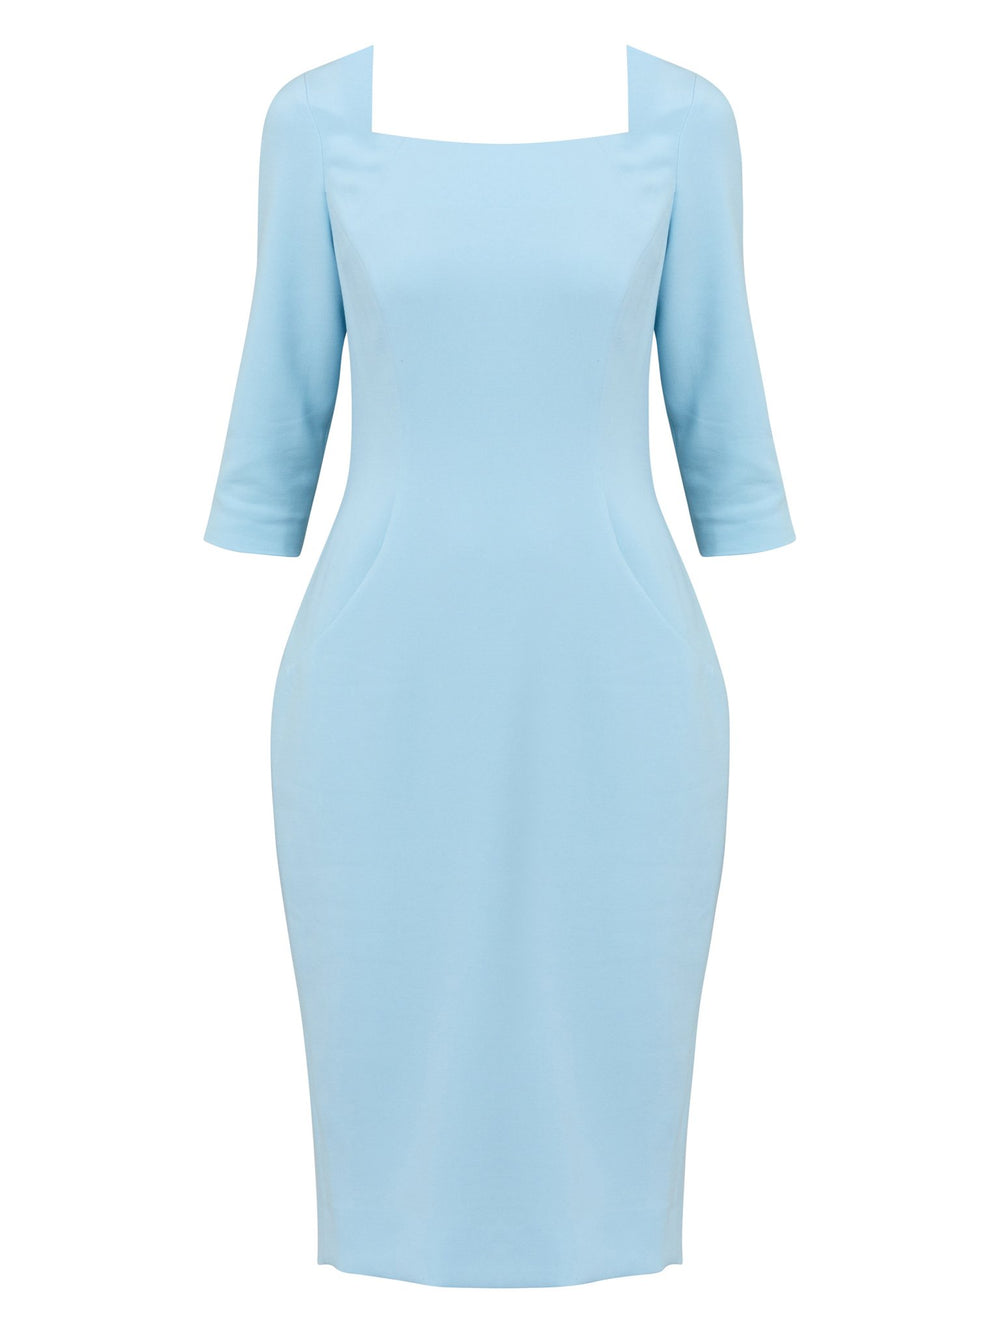 Introducing Mia, a body-skimming dress in a vibrant sky blue. Side body panels define the silhouette, a flattering square neck and the skirt falls to a demure finish below the knee. Simple and refined elegance at its best. Attending a summer wedding? Mother of the bride? Heading to the races? This is the dress for you.